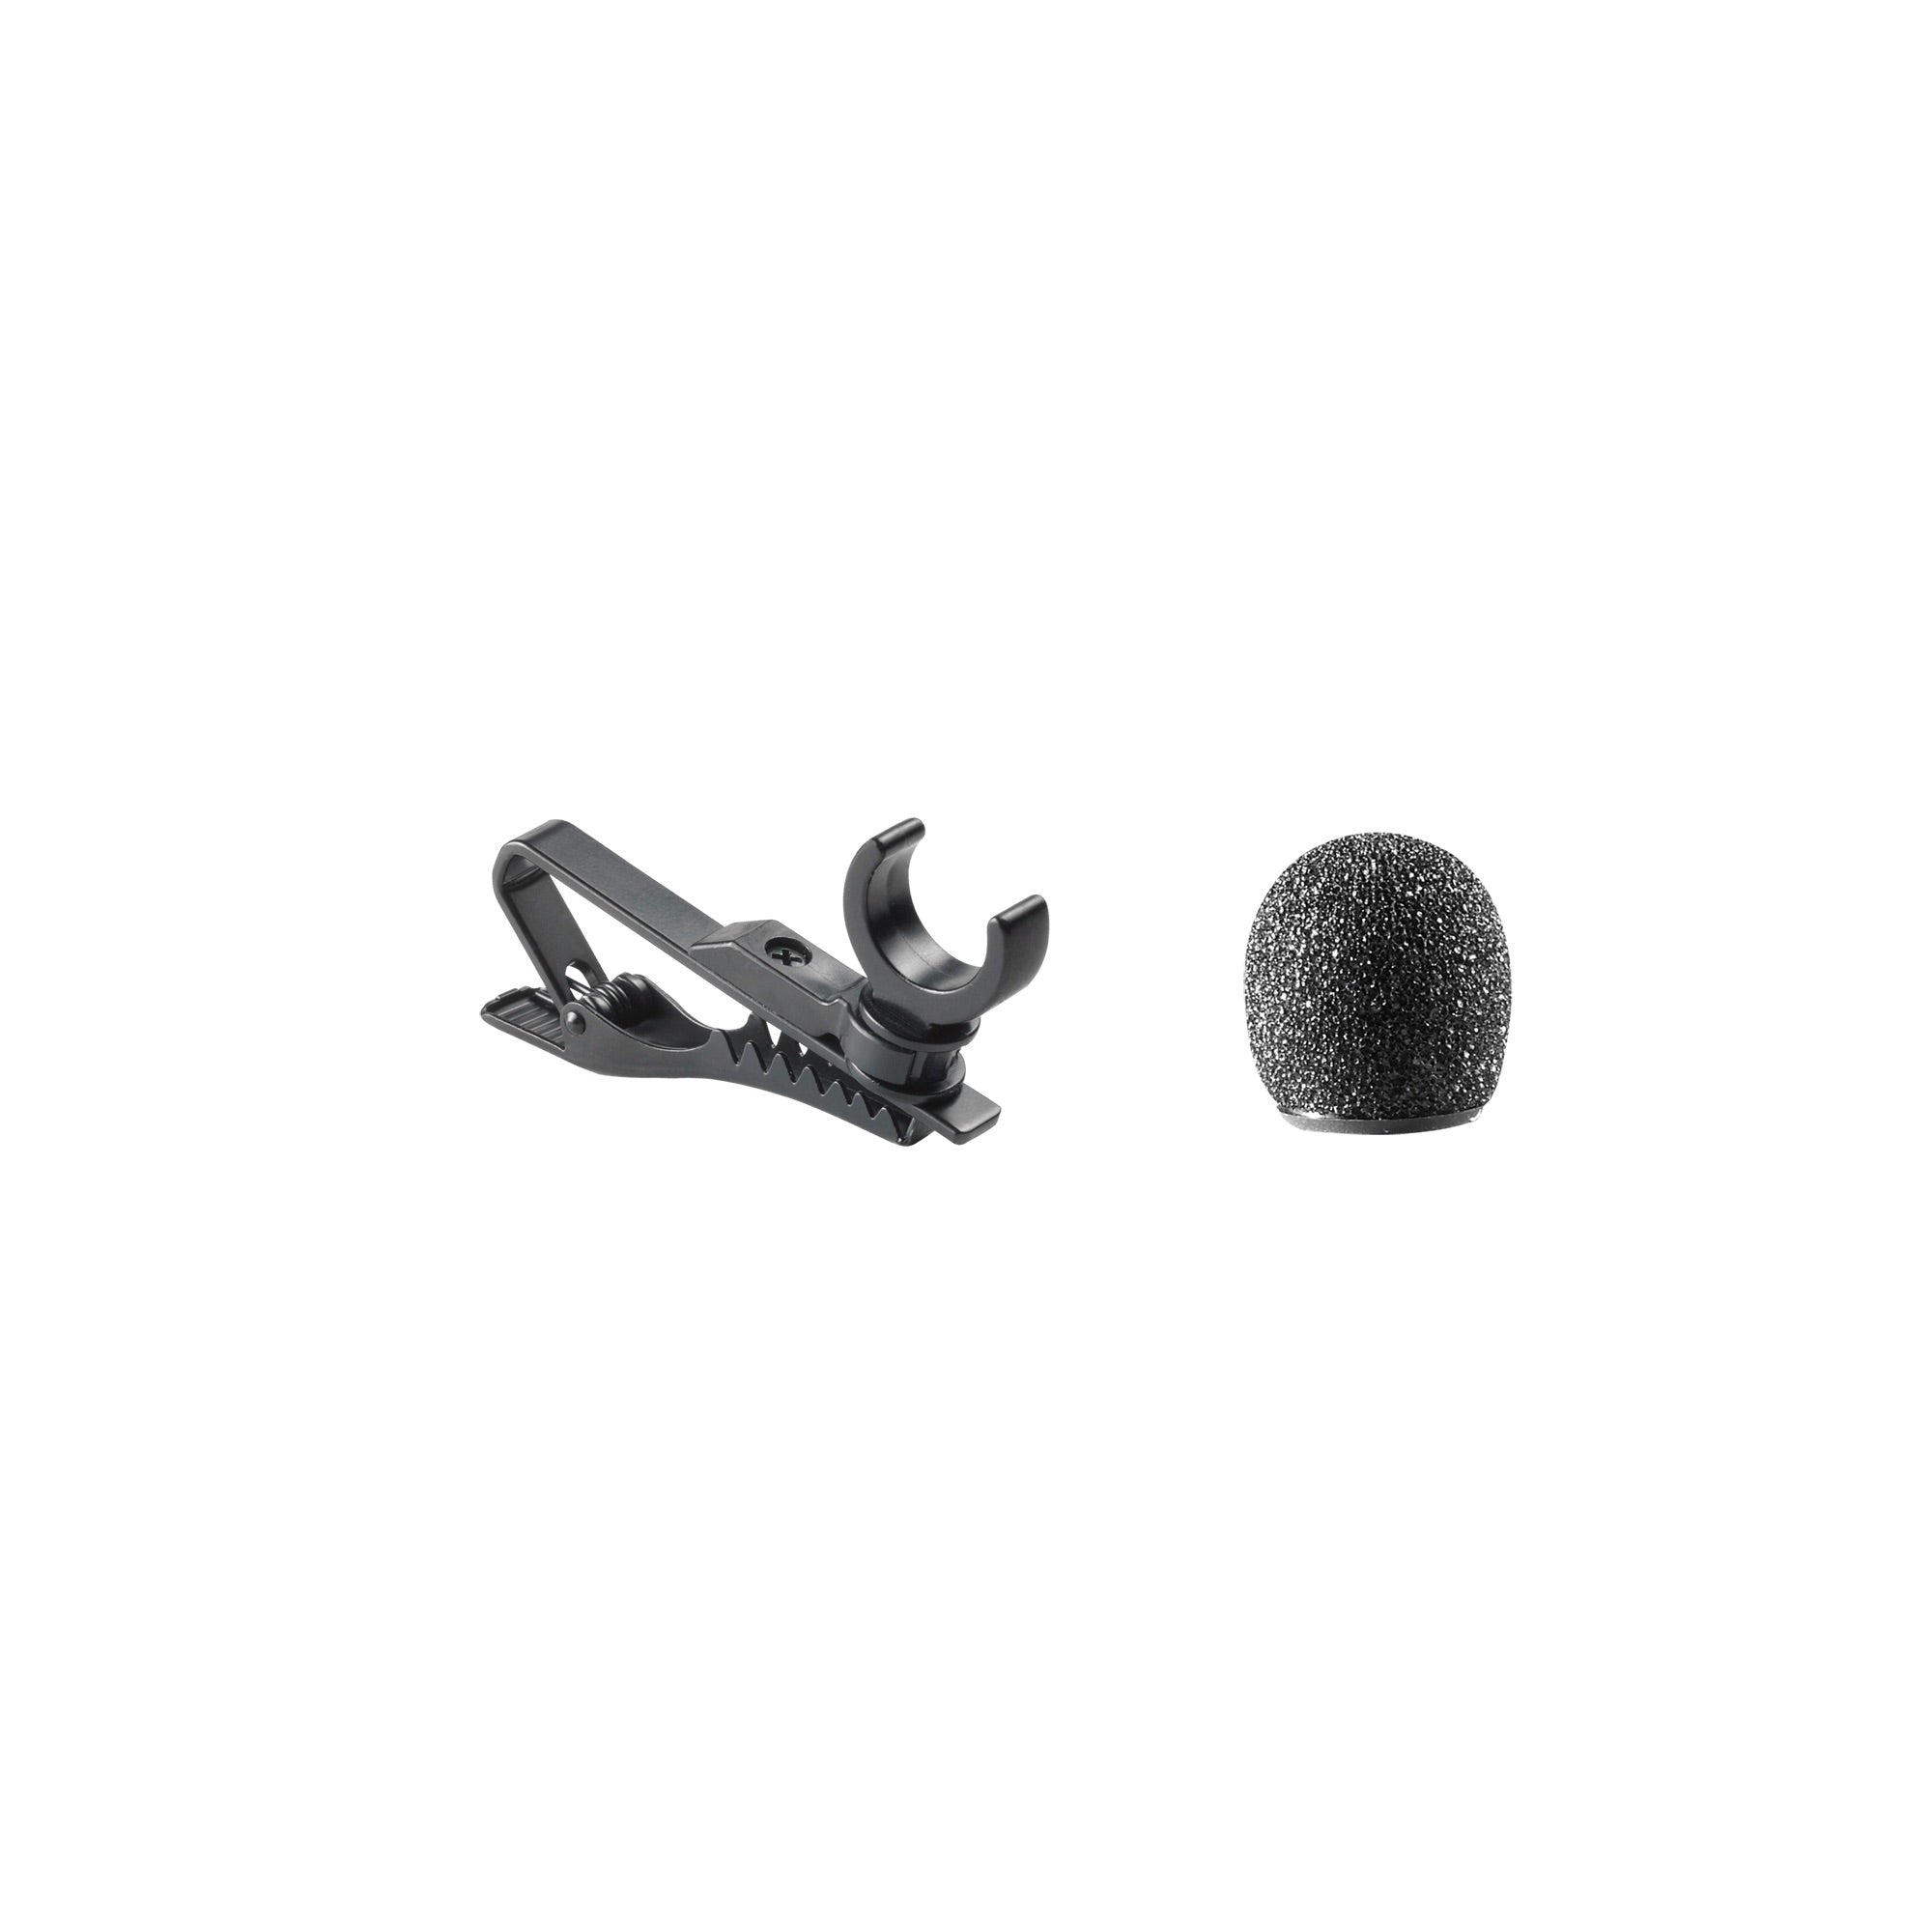 Audio-Technica AT829 Cardioid Condenser Lavalier Microphone, mic clip and windscreen included